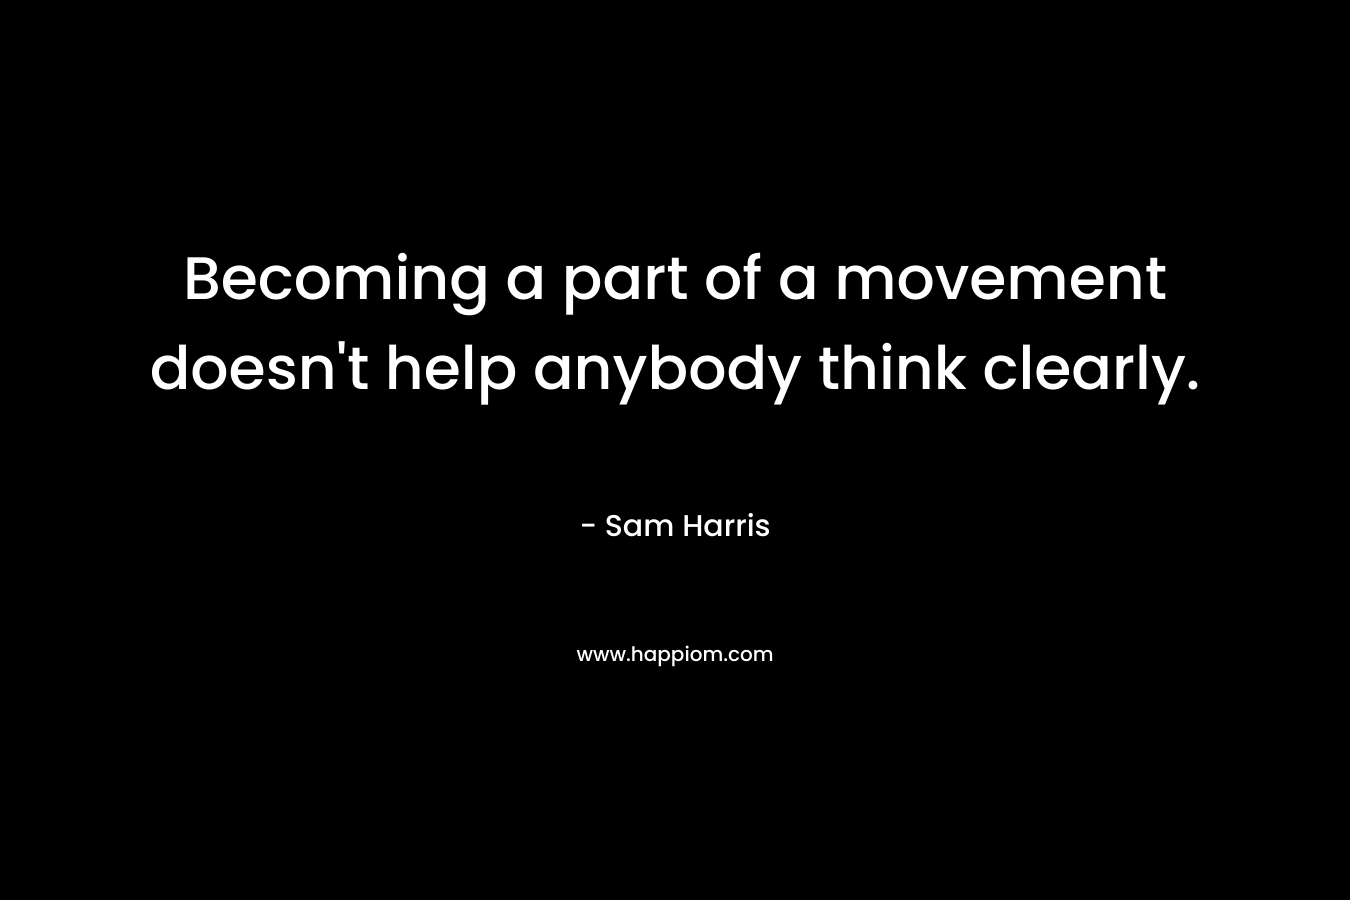 Becoming a part of a movement doesn’t help anybody think clearly. – Sam Harris